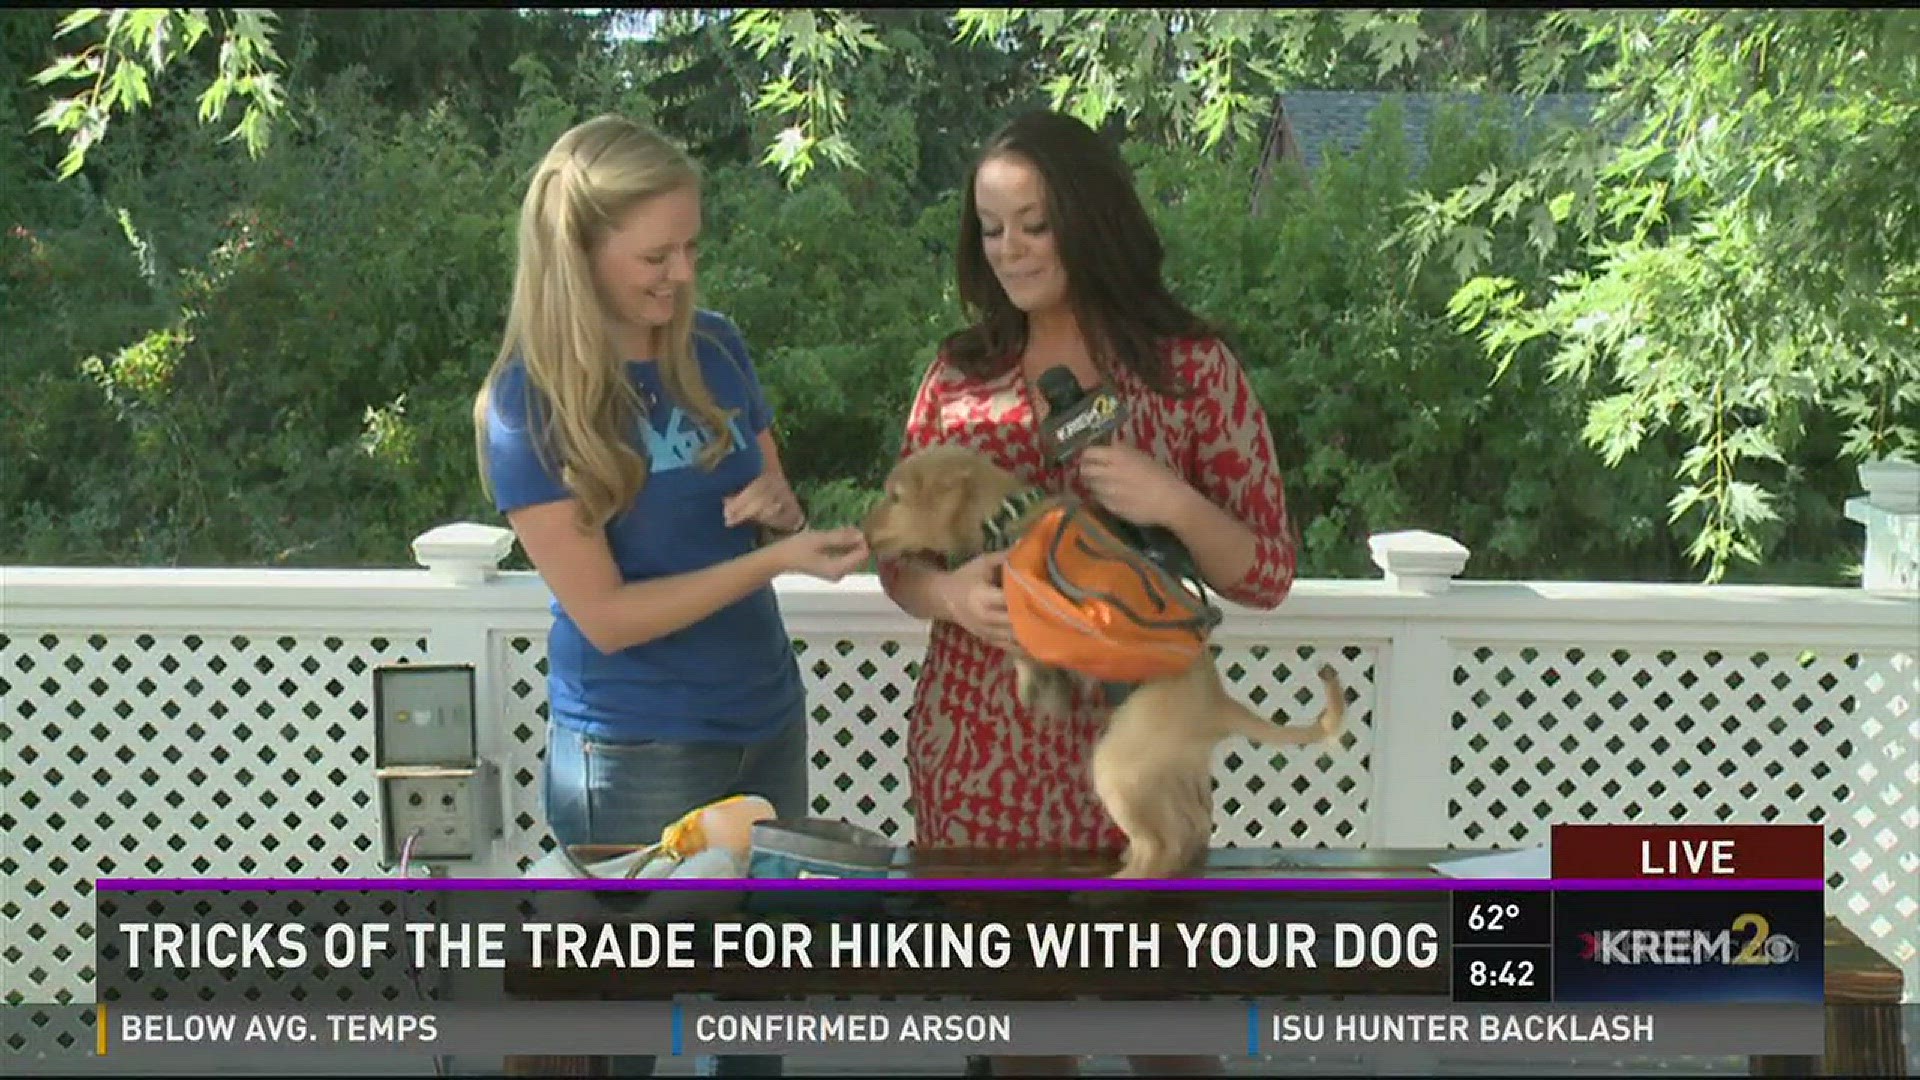 Carol Christensen from REI in Spokane is back on KREM 2 Morning News on Wednesday. This time, she's giving us some tricks on hiking with your dog!